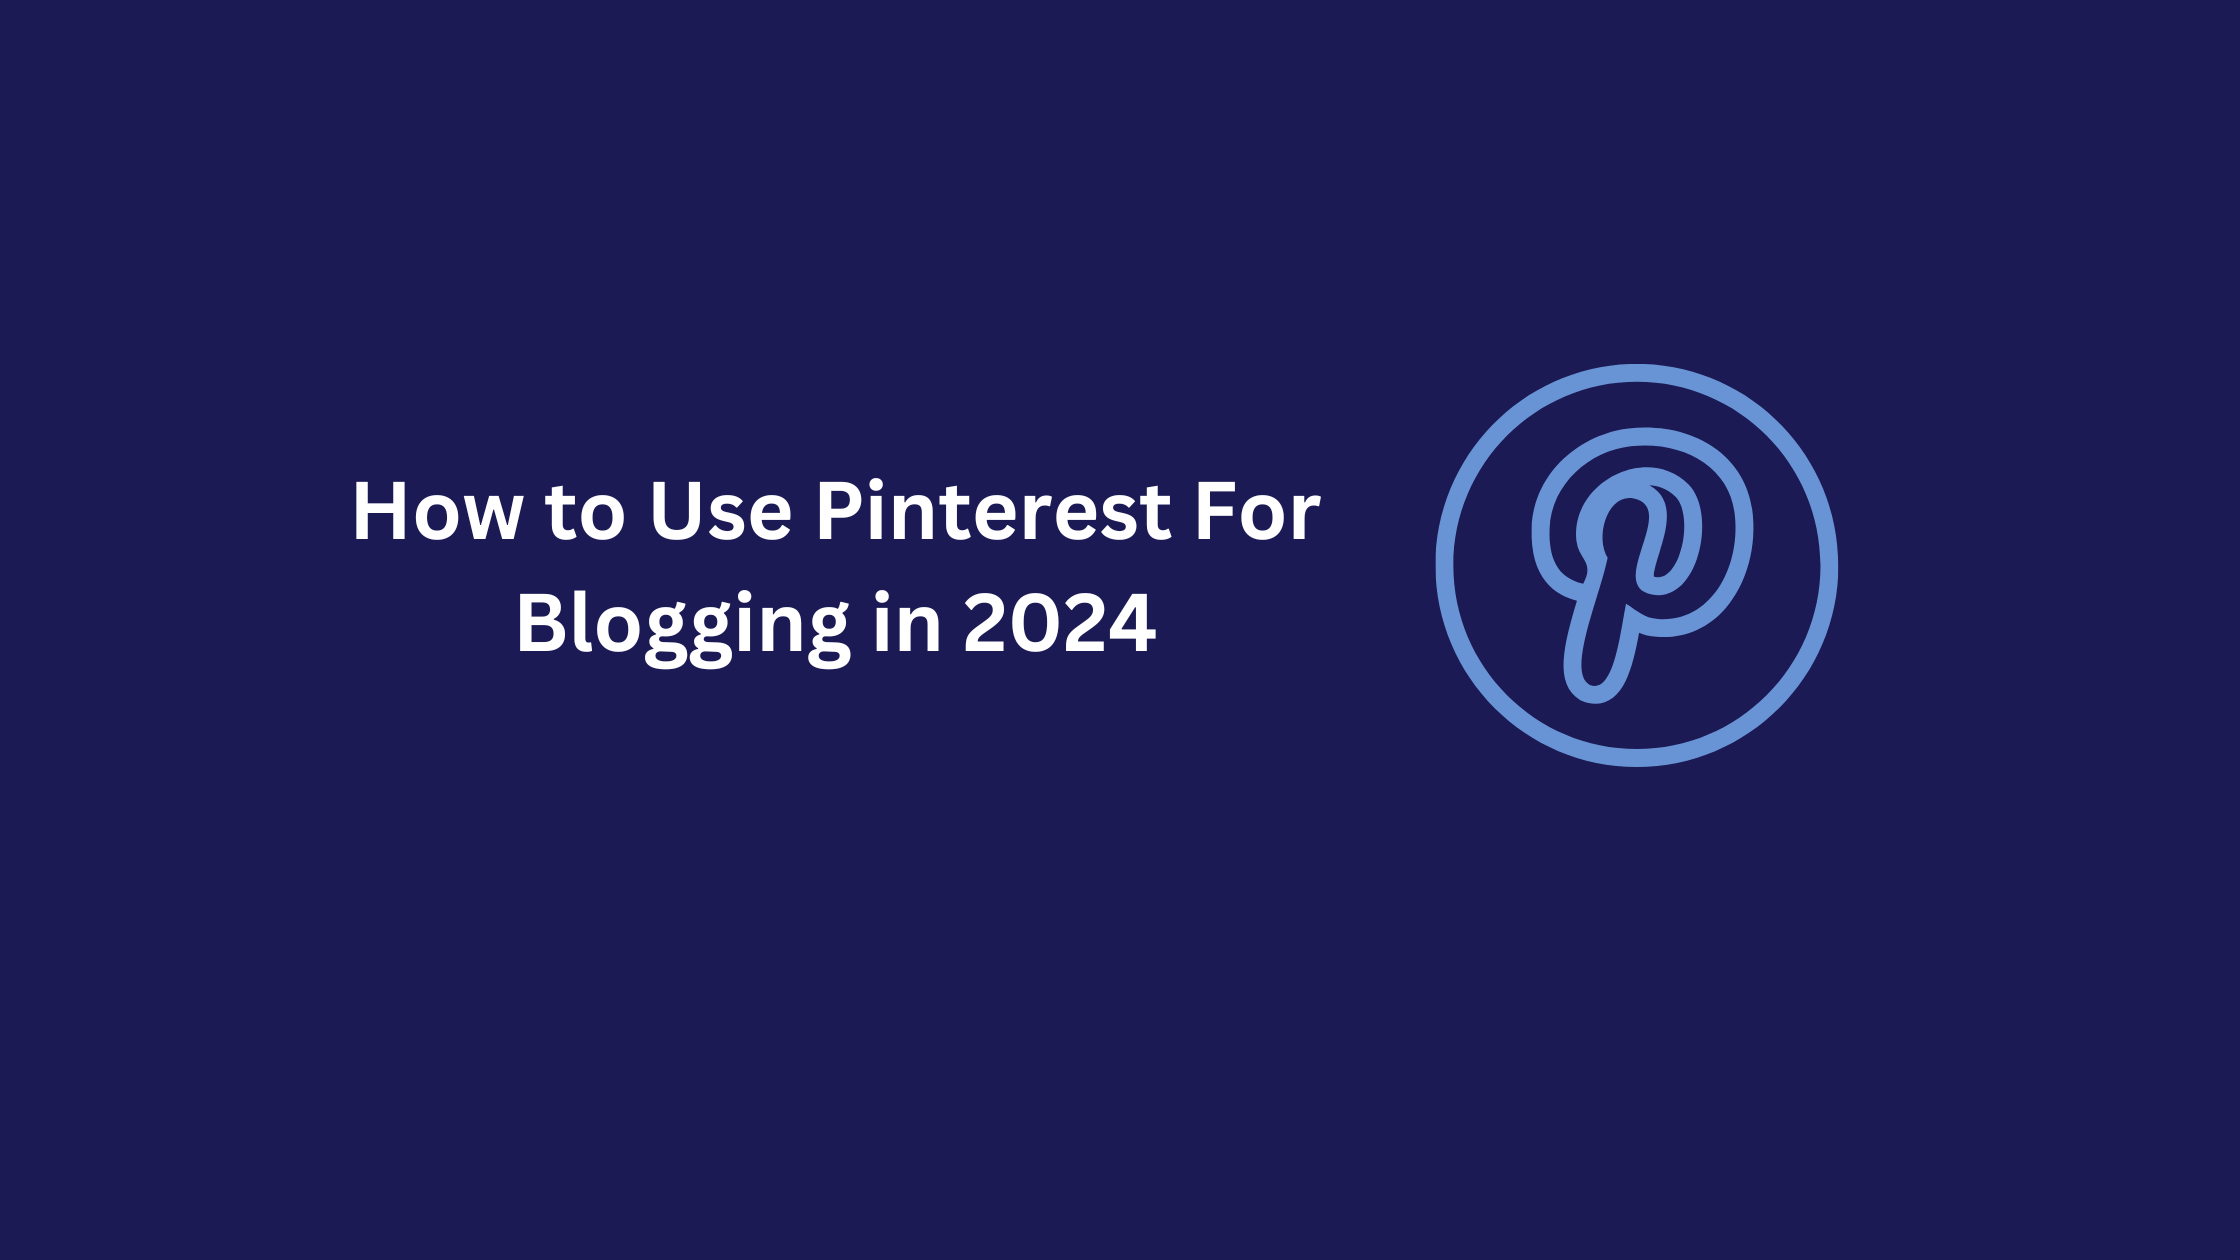 How to Use Pinterest For Blogging in 2024